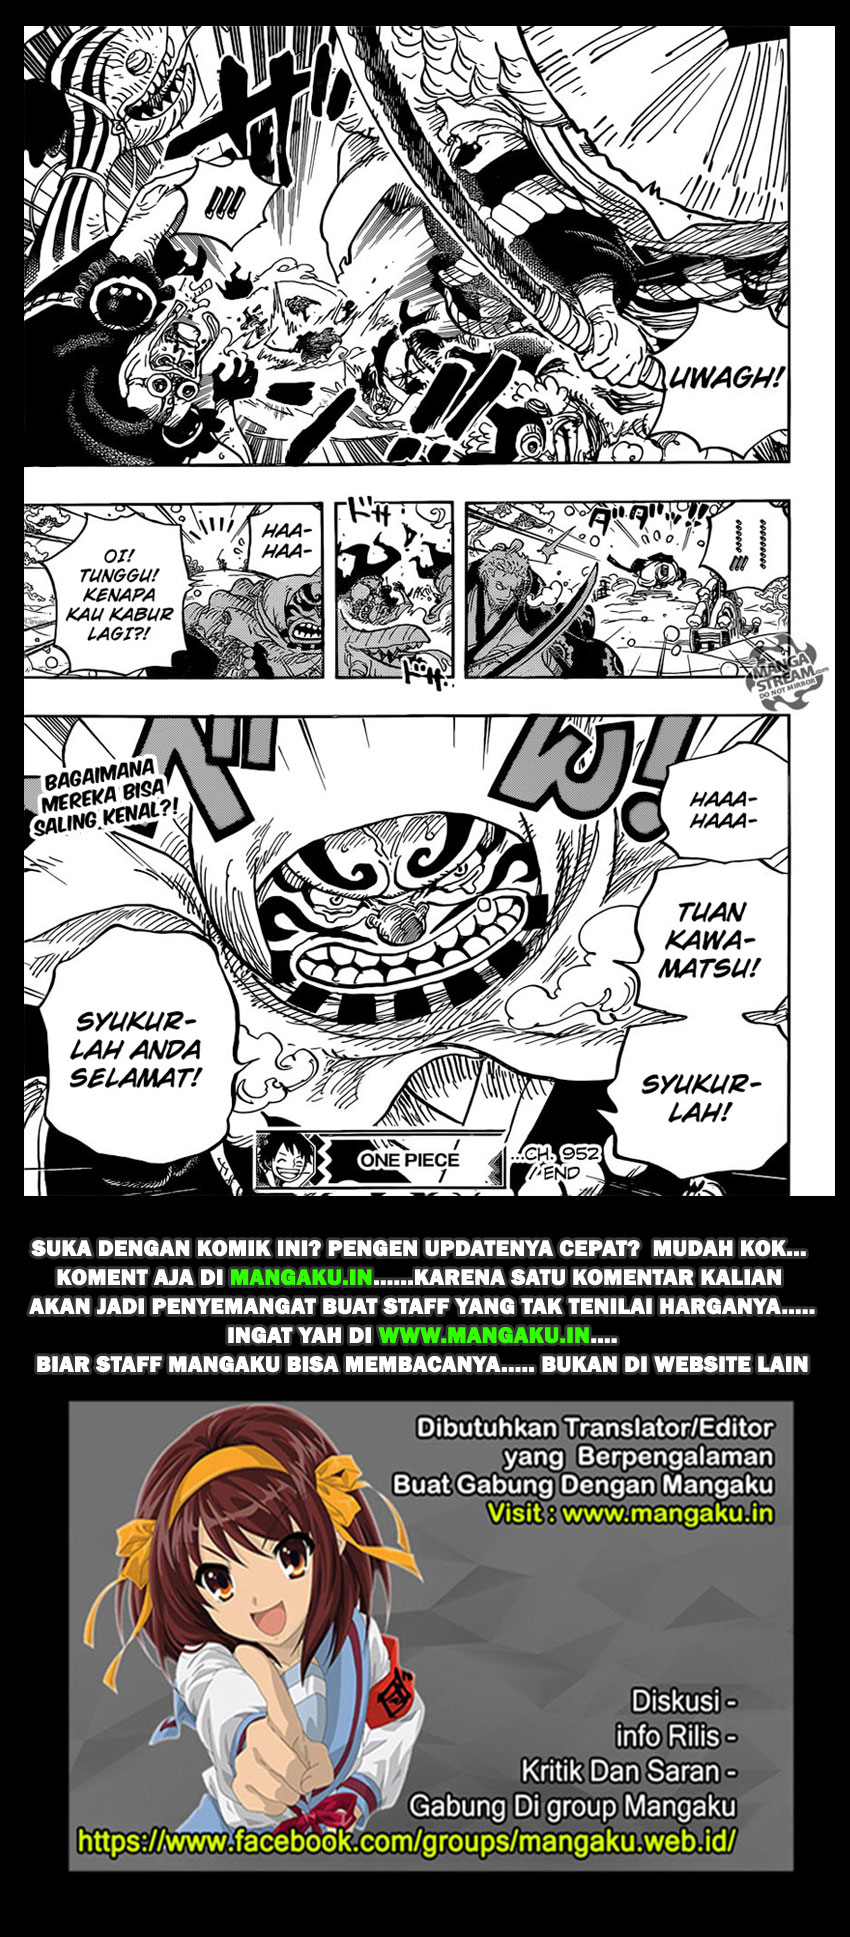 One Piece Chapter 952 Image 17